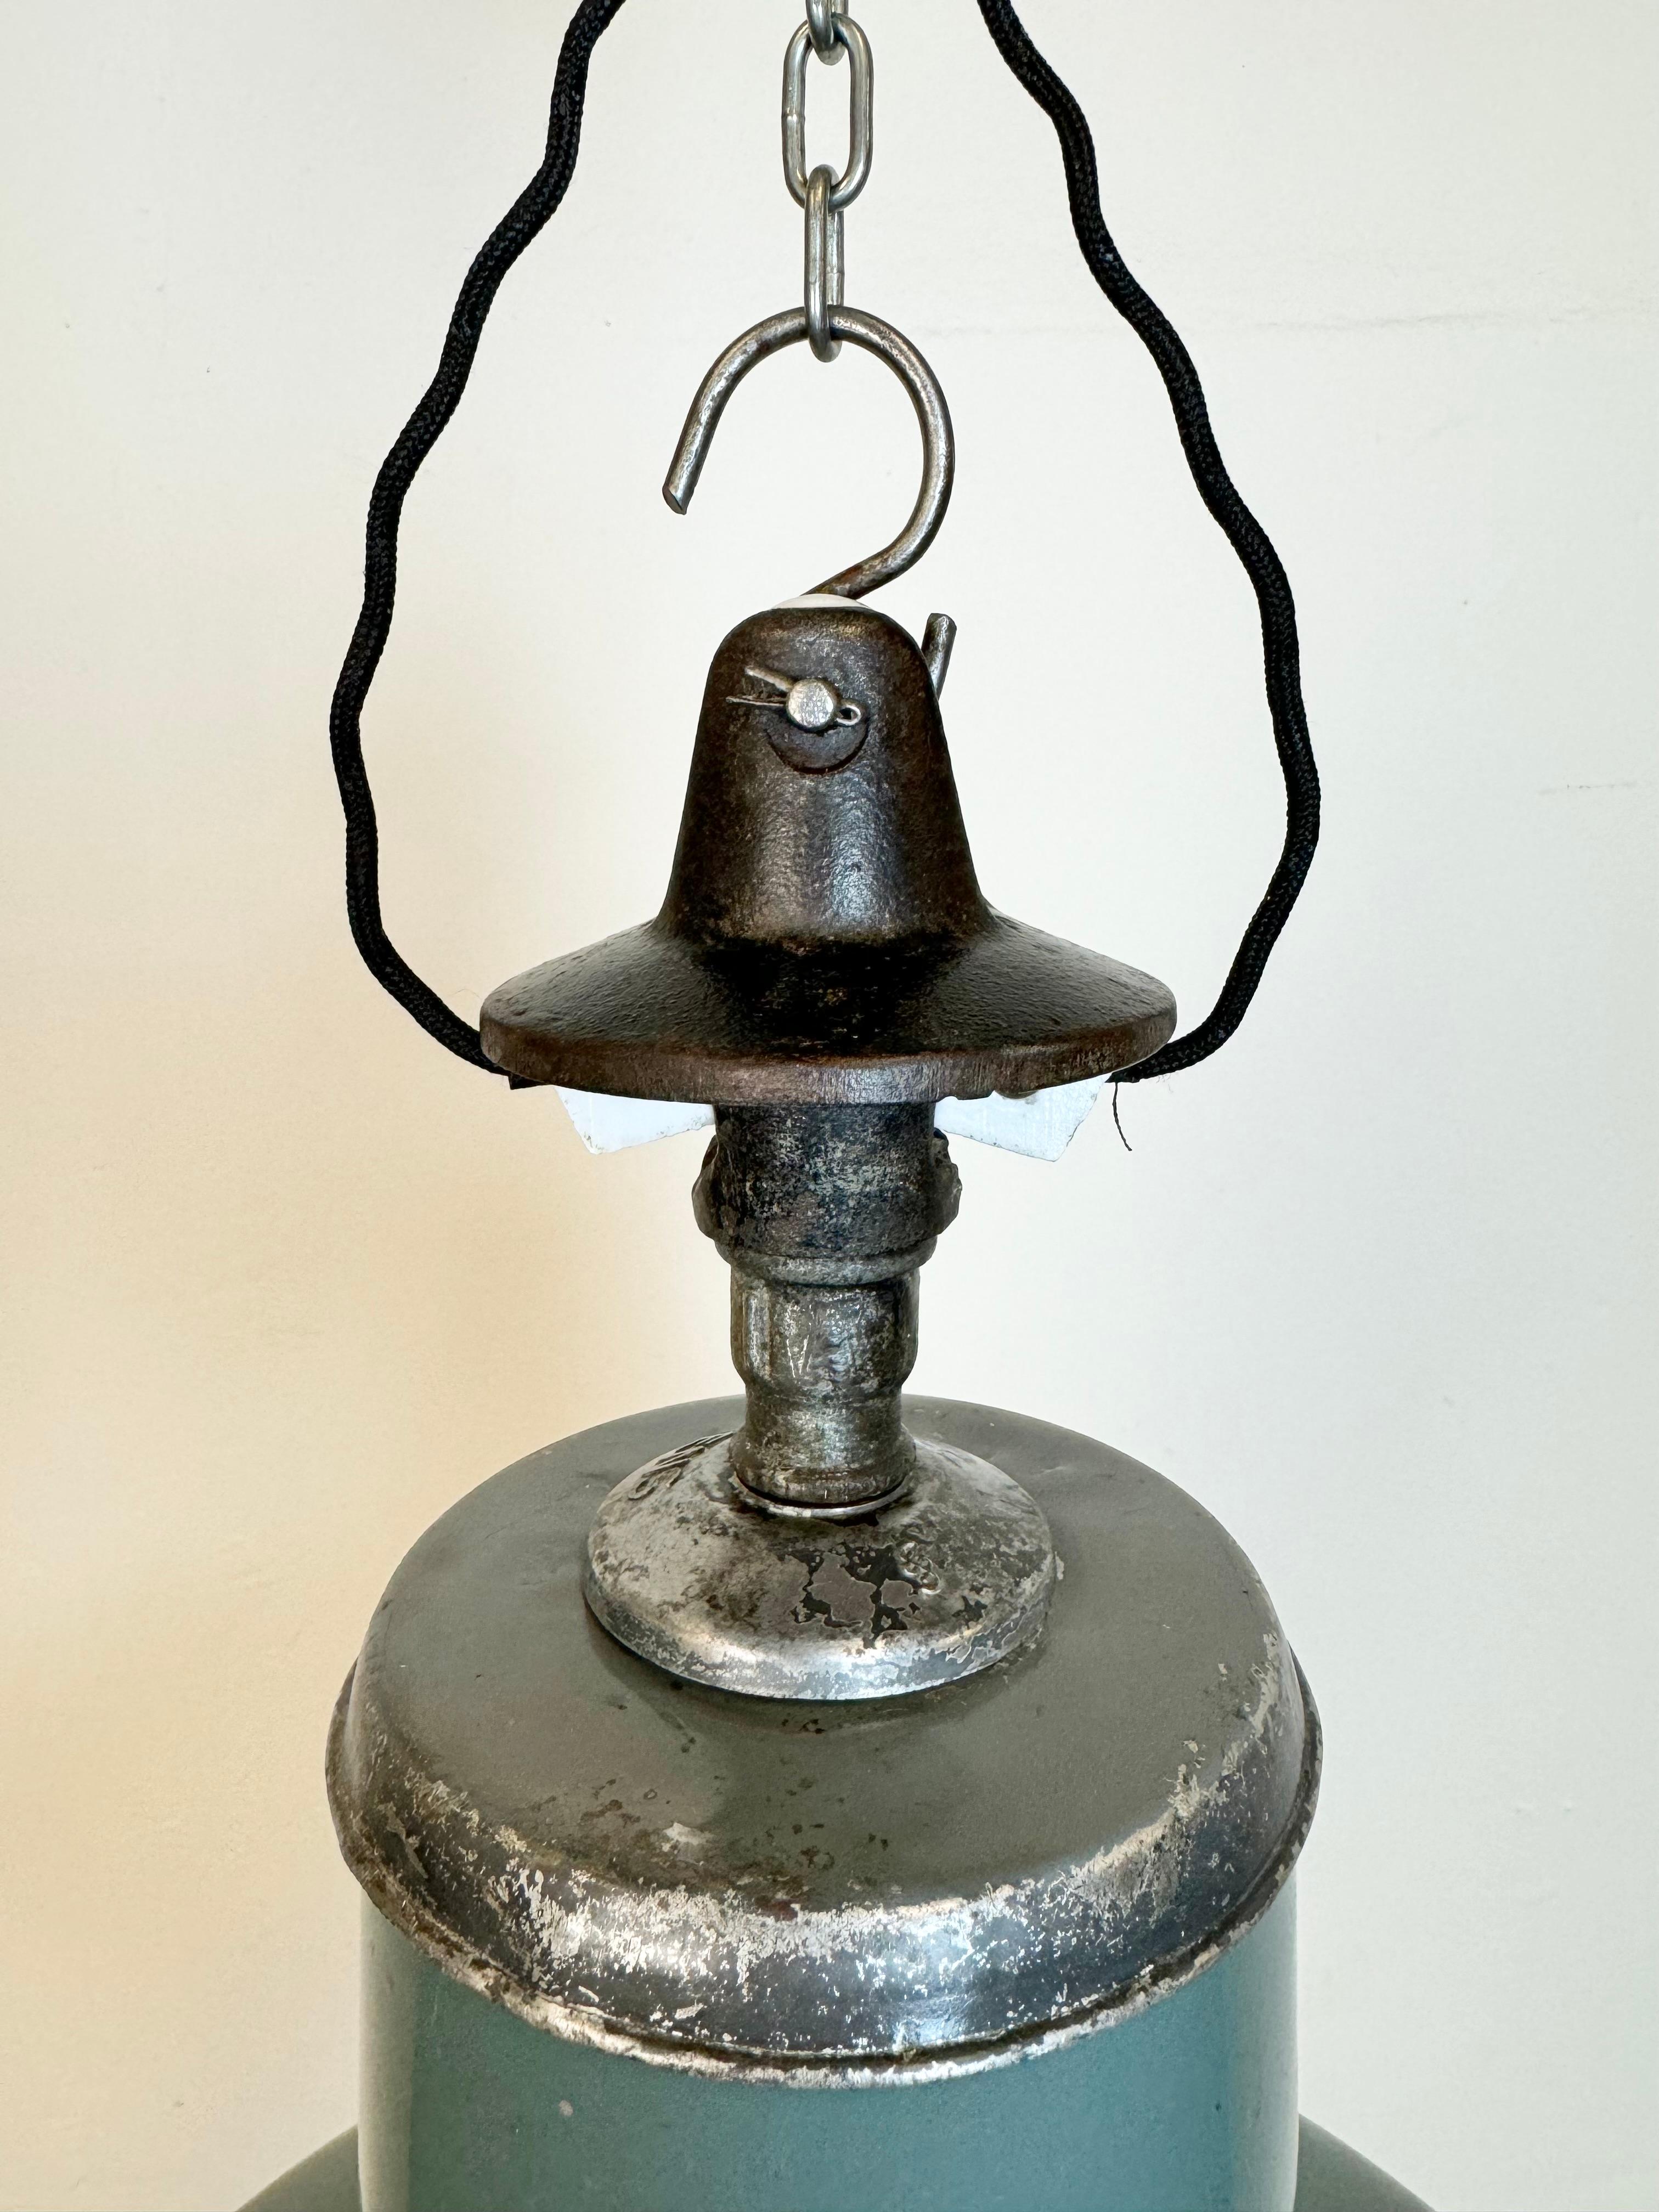 Industrial Grey Enamel Pendant Lamp from Siemens, 1930s In Good Condition For Sale In Kojetice, CZ